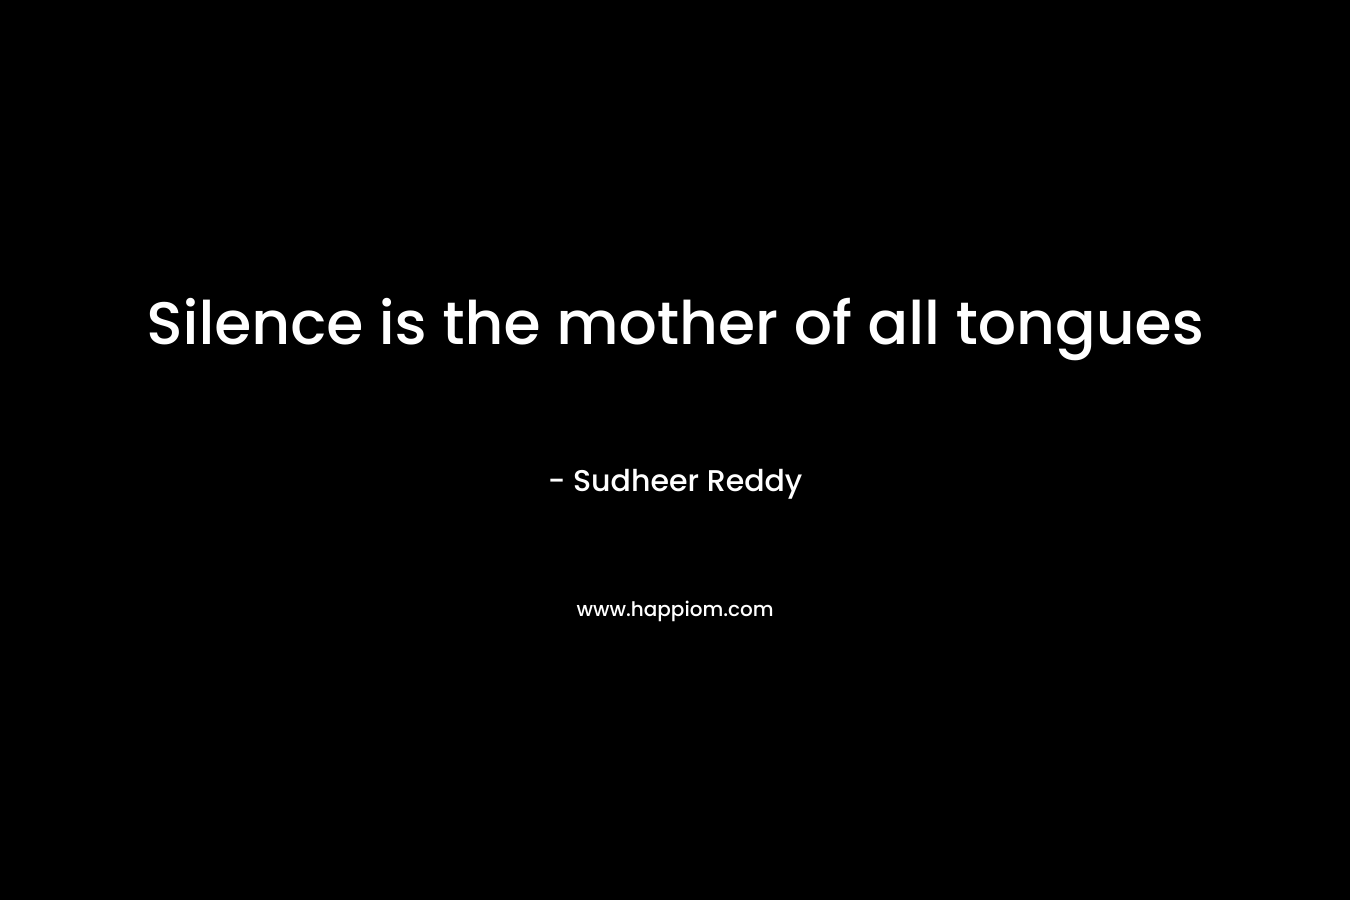 Silence is the mother of all tongues